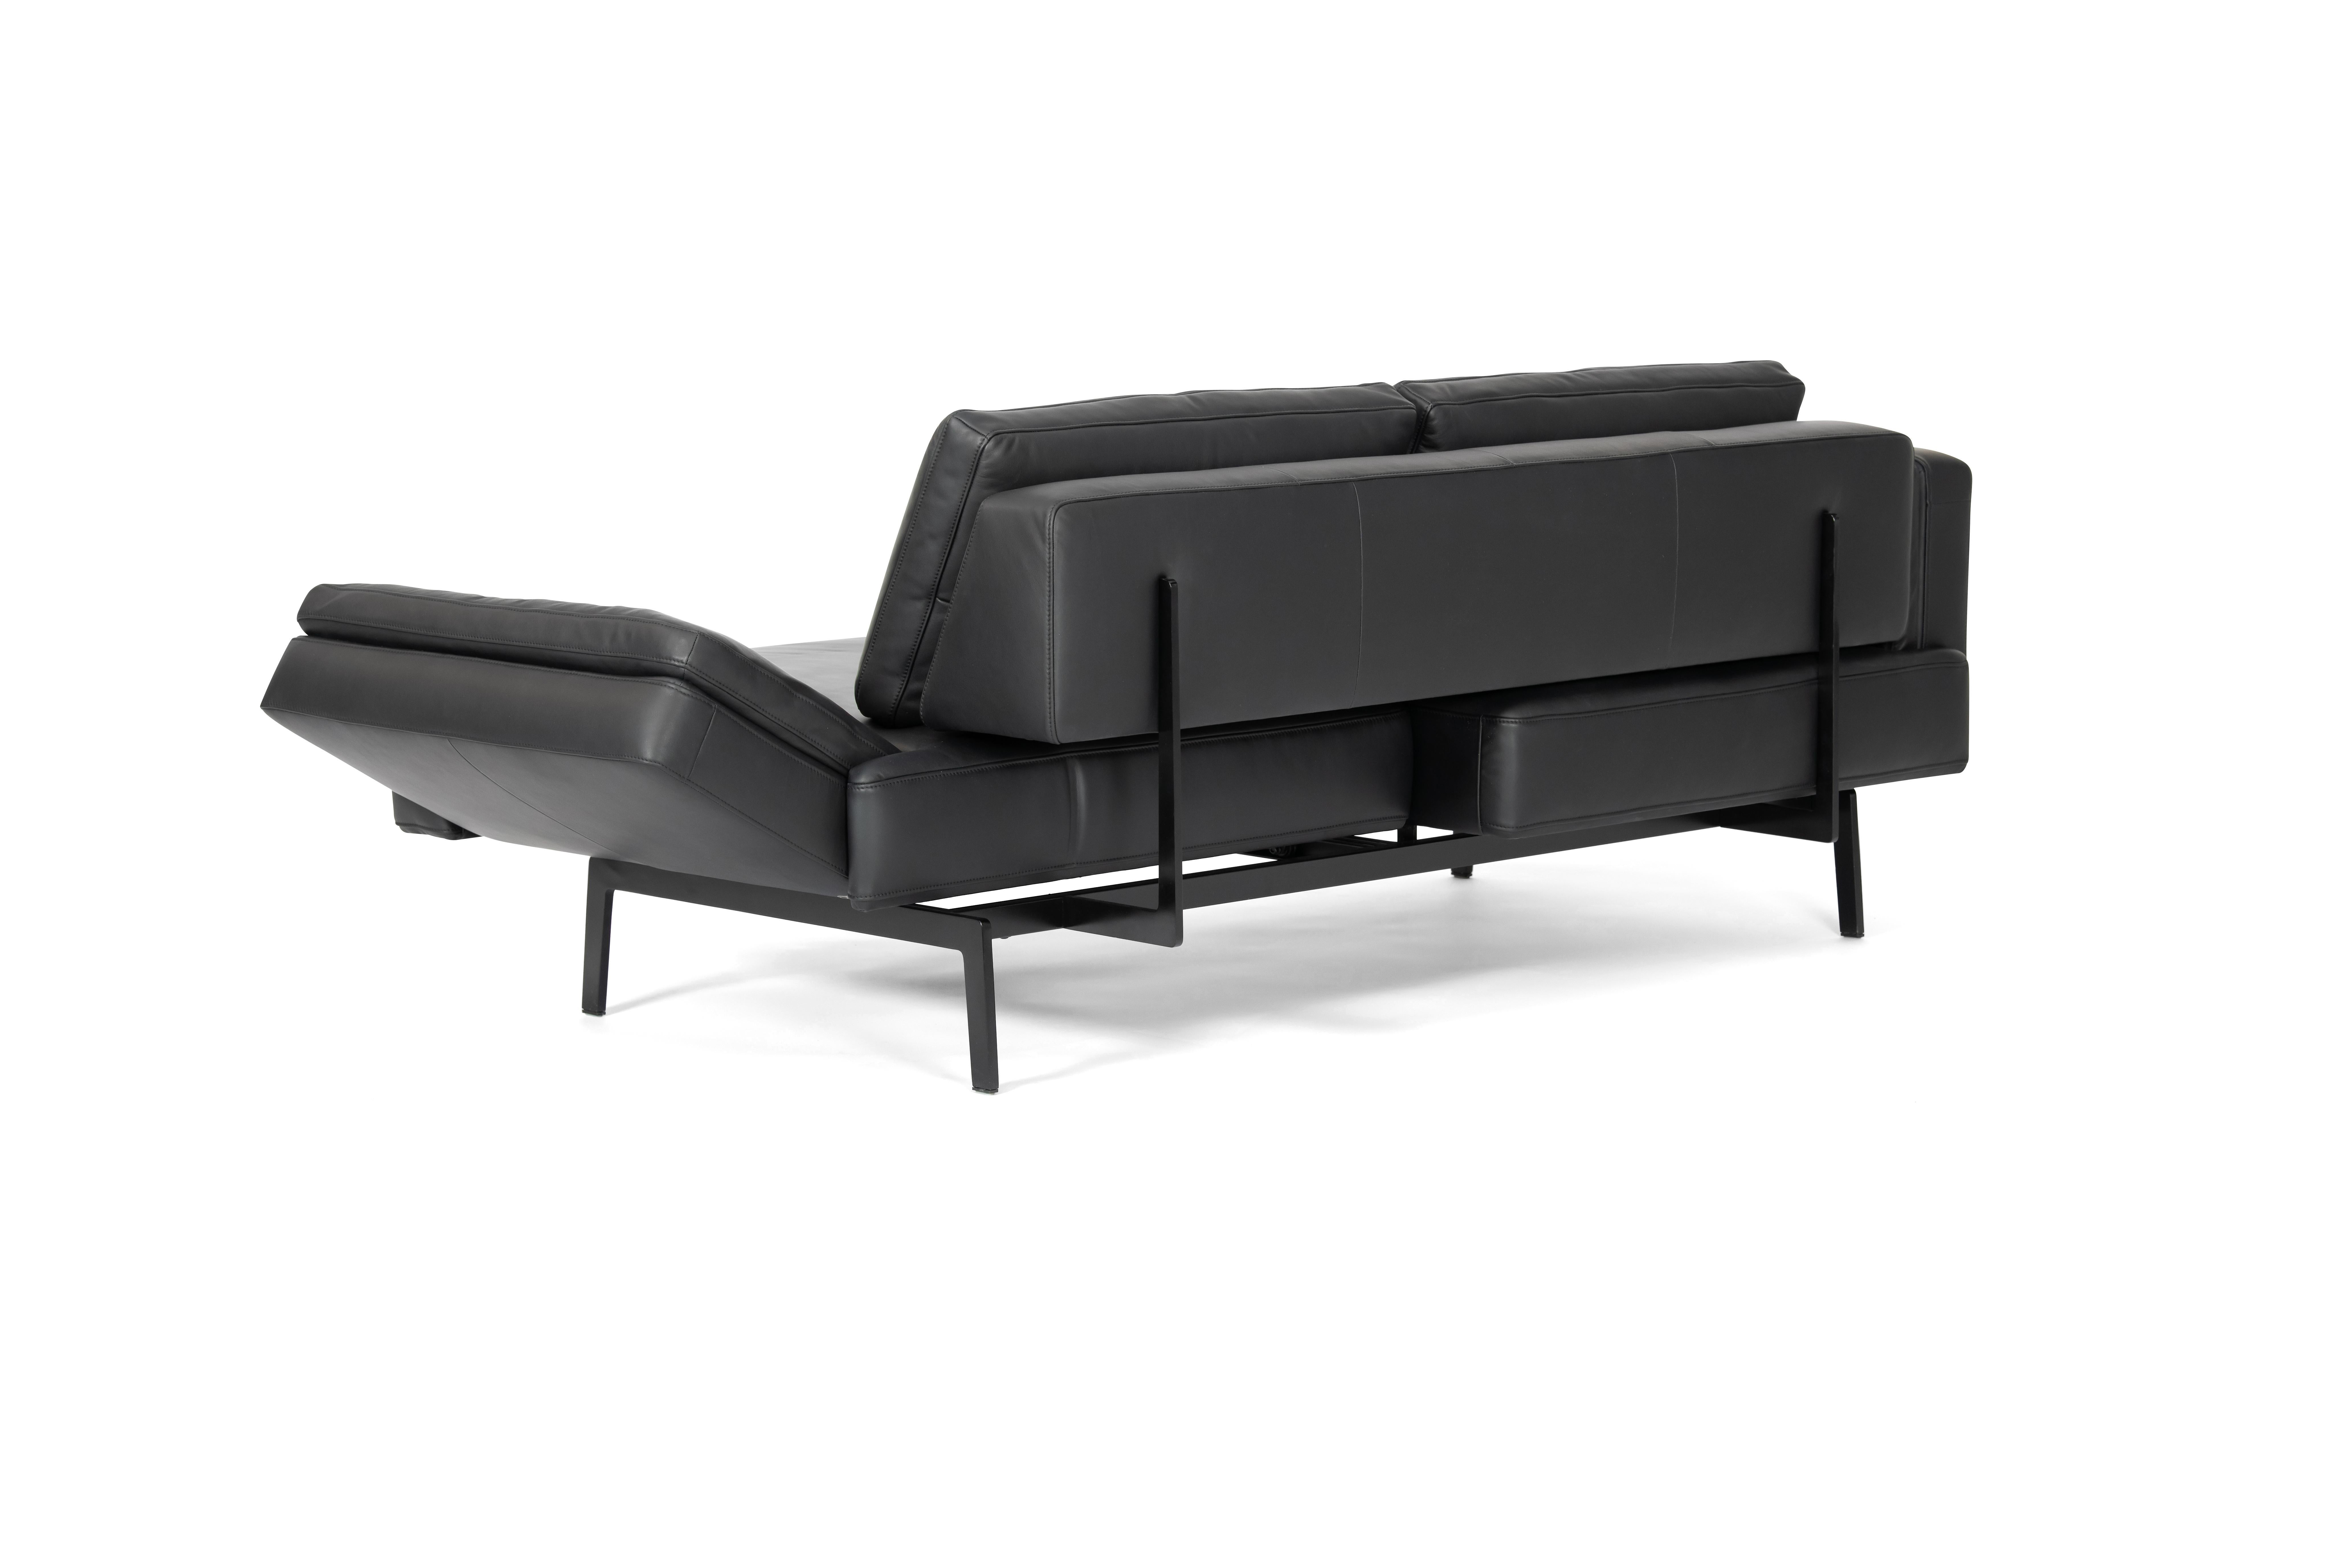 Swiss De Sede DS-747/23 Multifunctional Sofa in Black Leather Seat and Back Upholstery For Sale